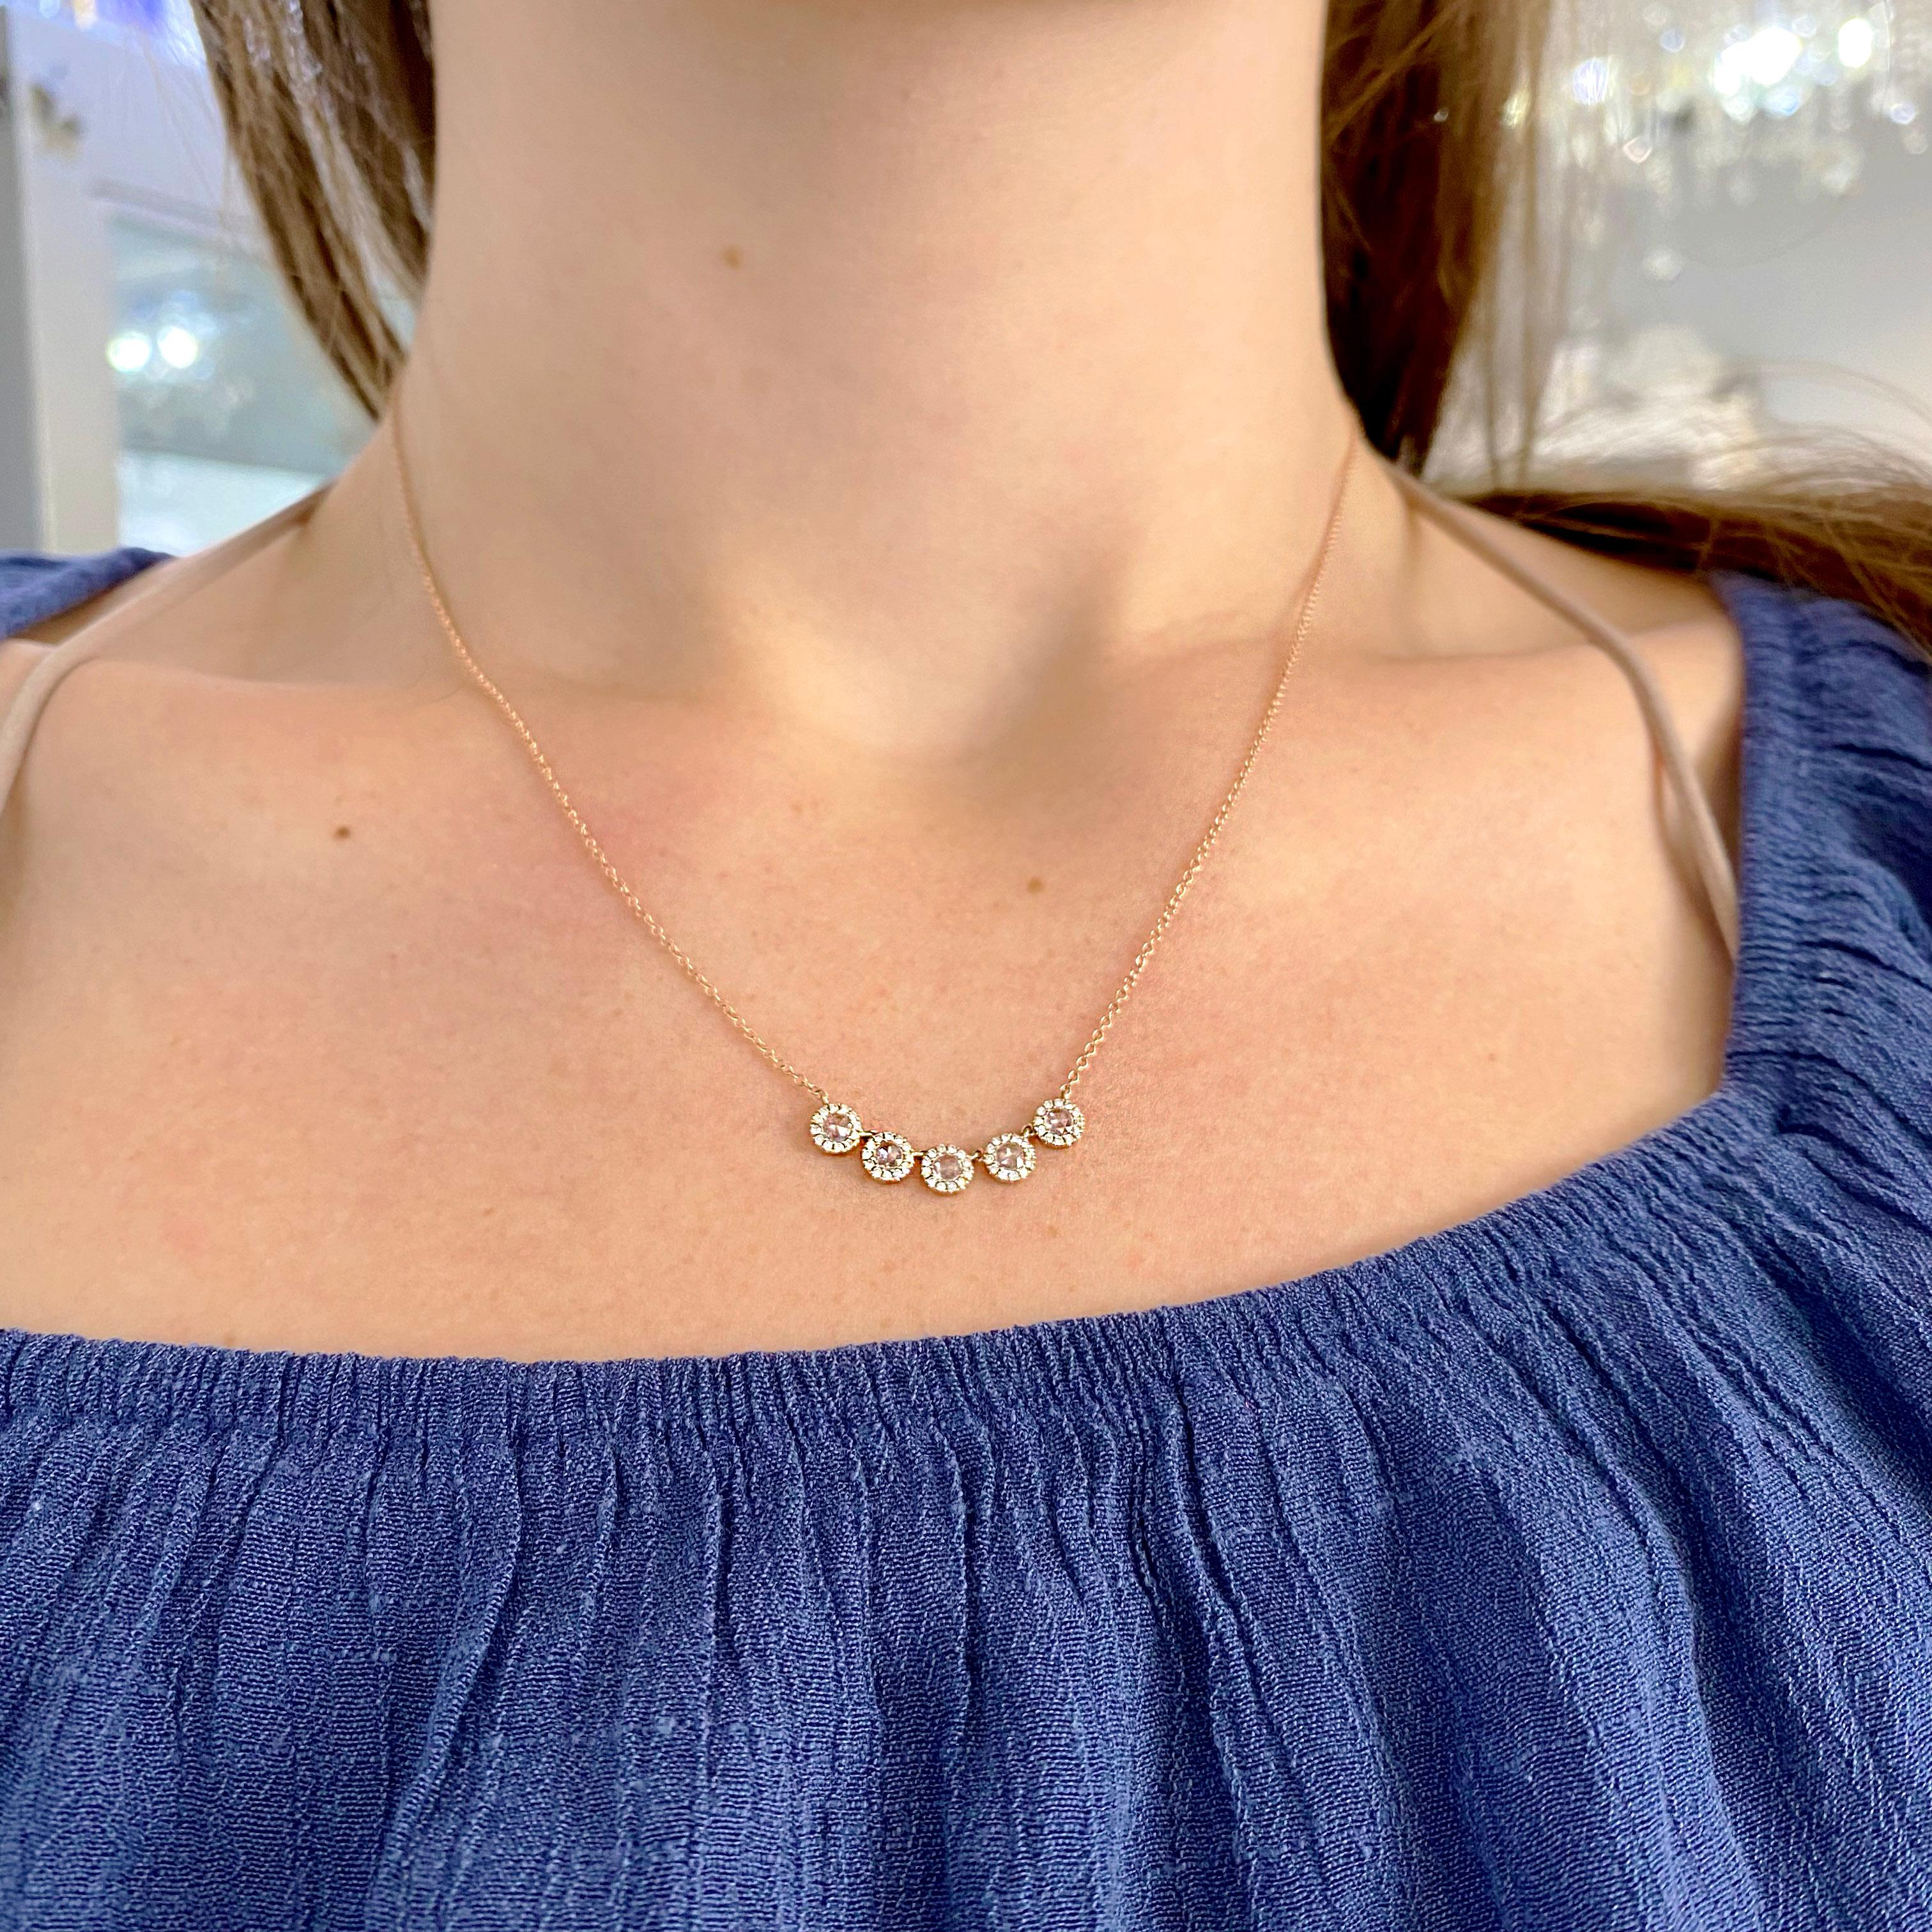 This gorgeous rose gold necklace can perfectly adjust to anyone's neck size. Rose gold is the hottest metal for 2021!

Metal Quality: 14 kt Rose Gold
Diamond Number: 65
Diamond Total Weight: .45 Ct
Diamond Clarity: VS2 (excellent, eye clean)
Diamond